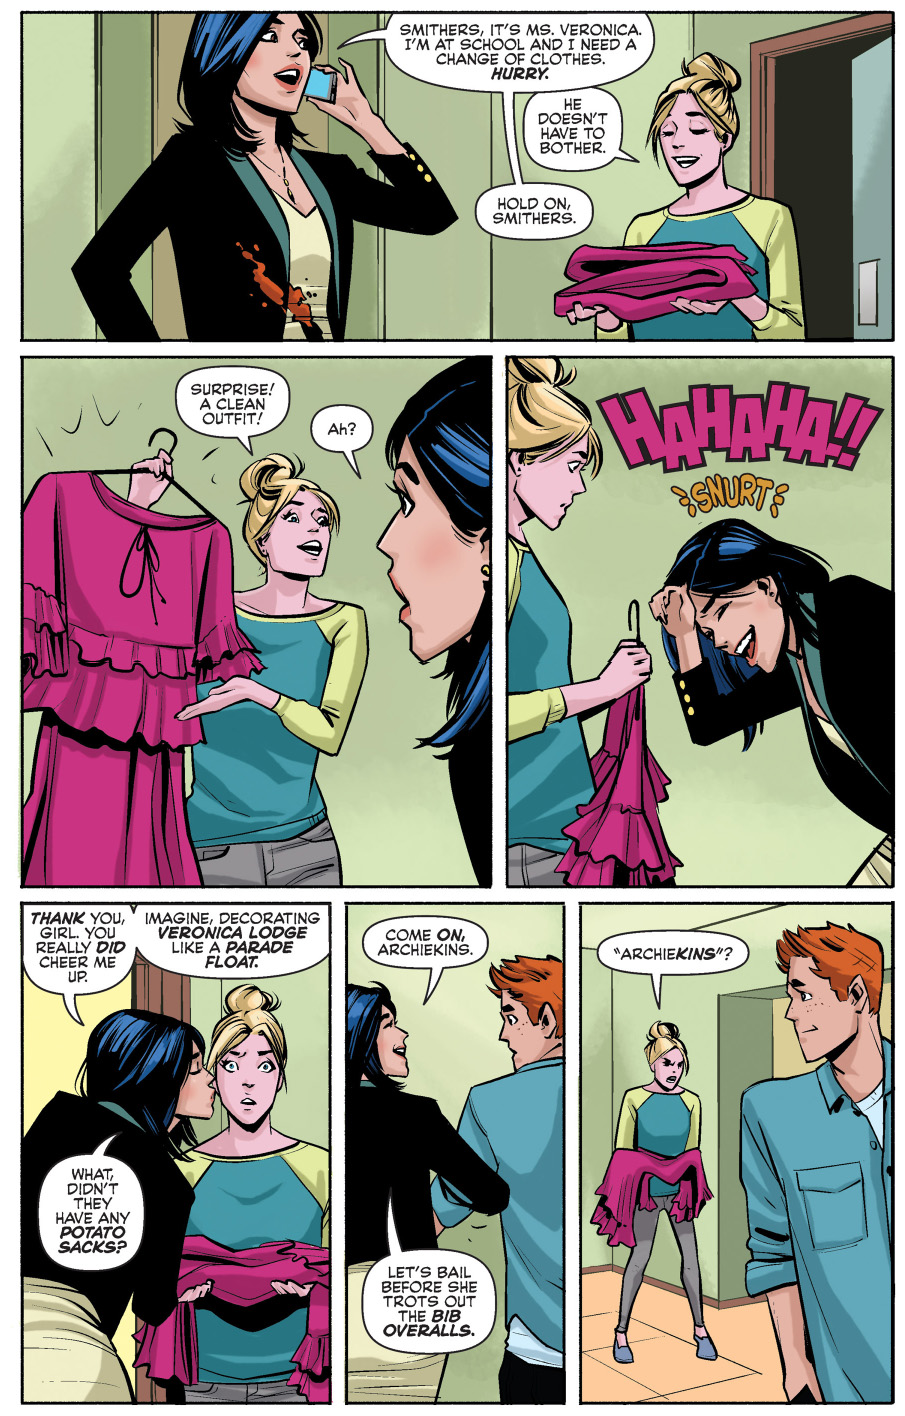 betty and veronica's first meeting